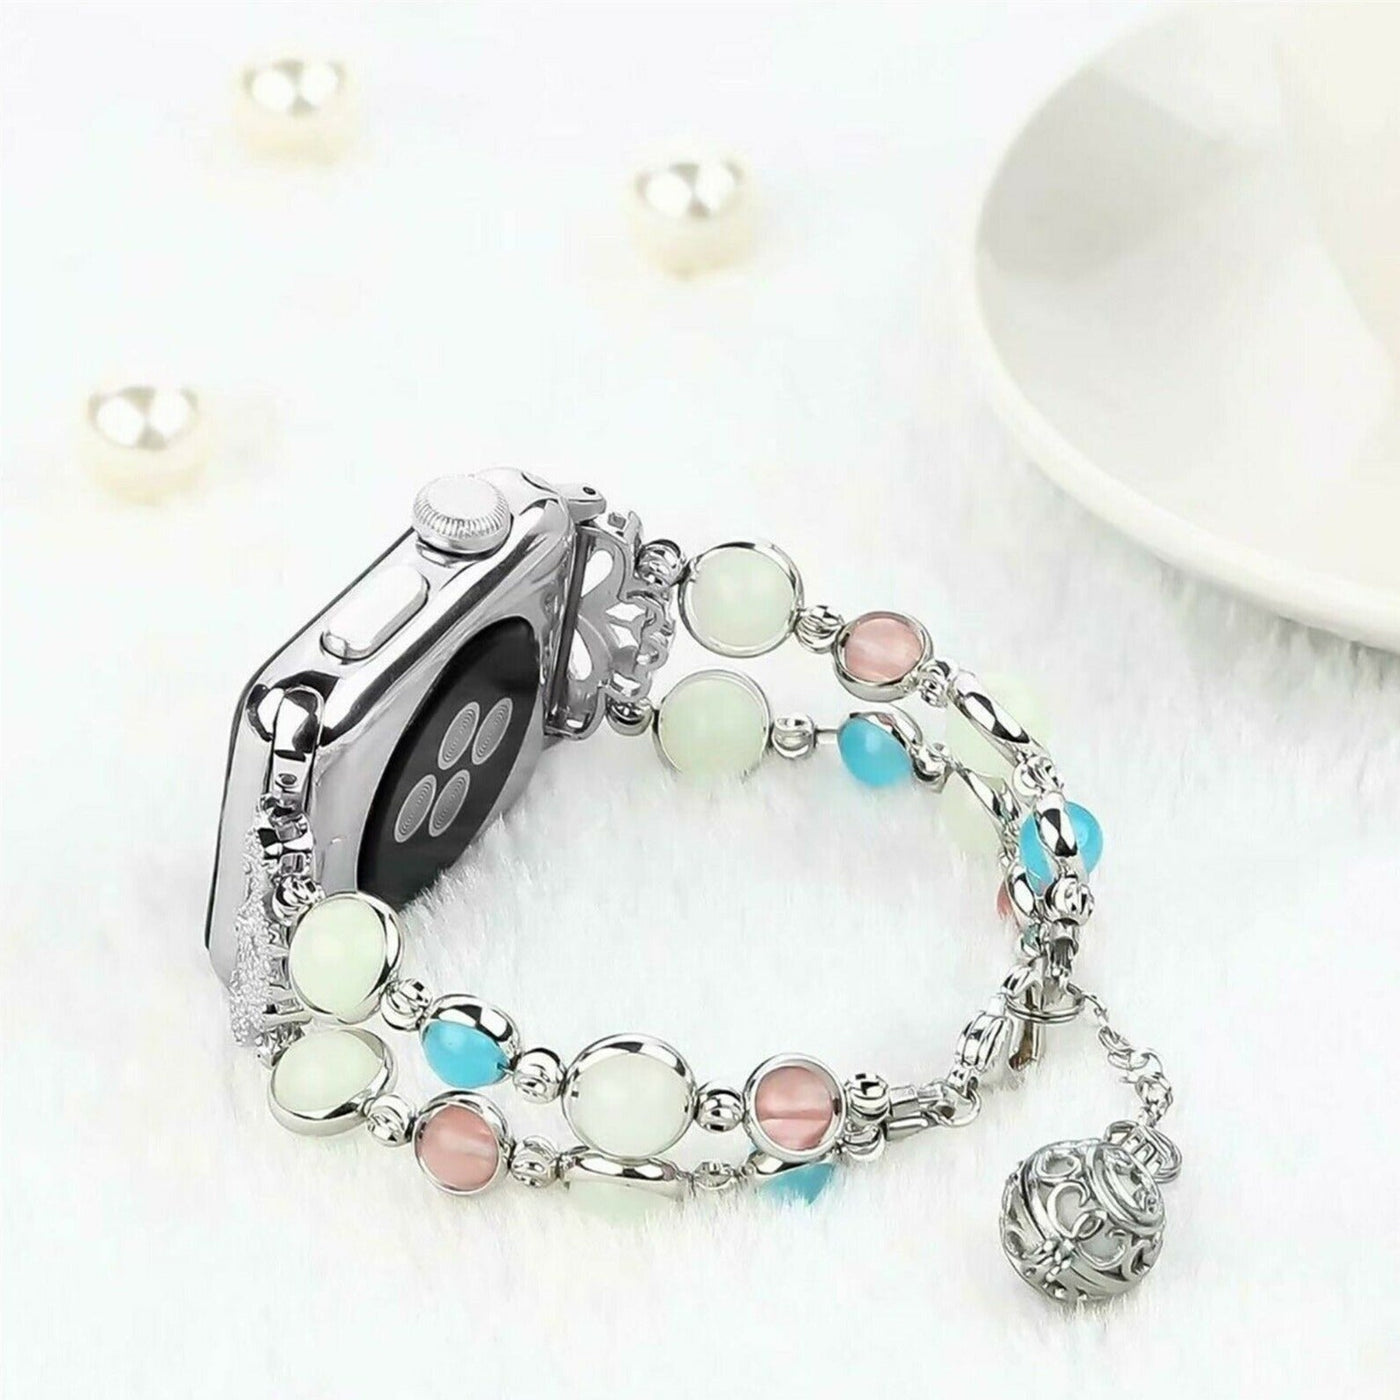 Beading Stretchable Bracelet for Apple Watch [41/45MM]